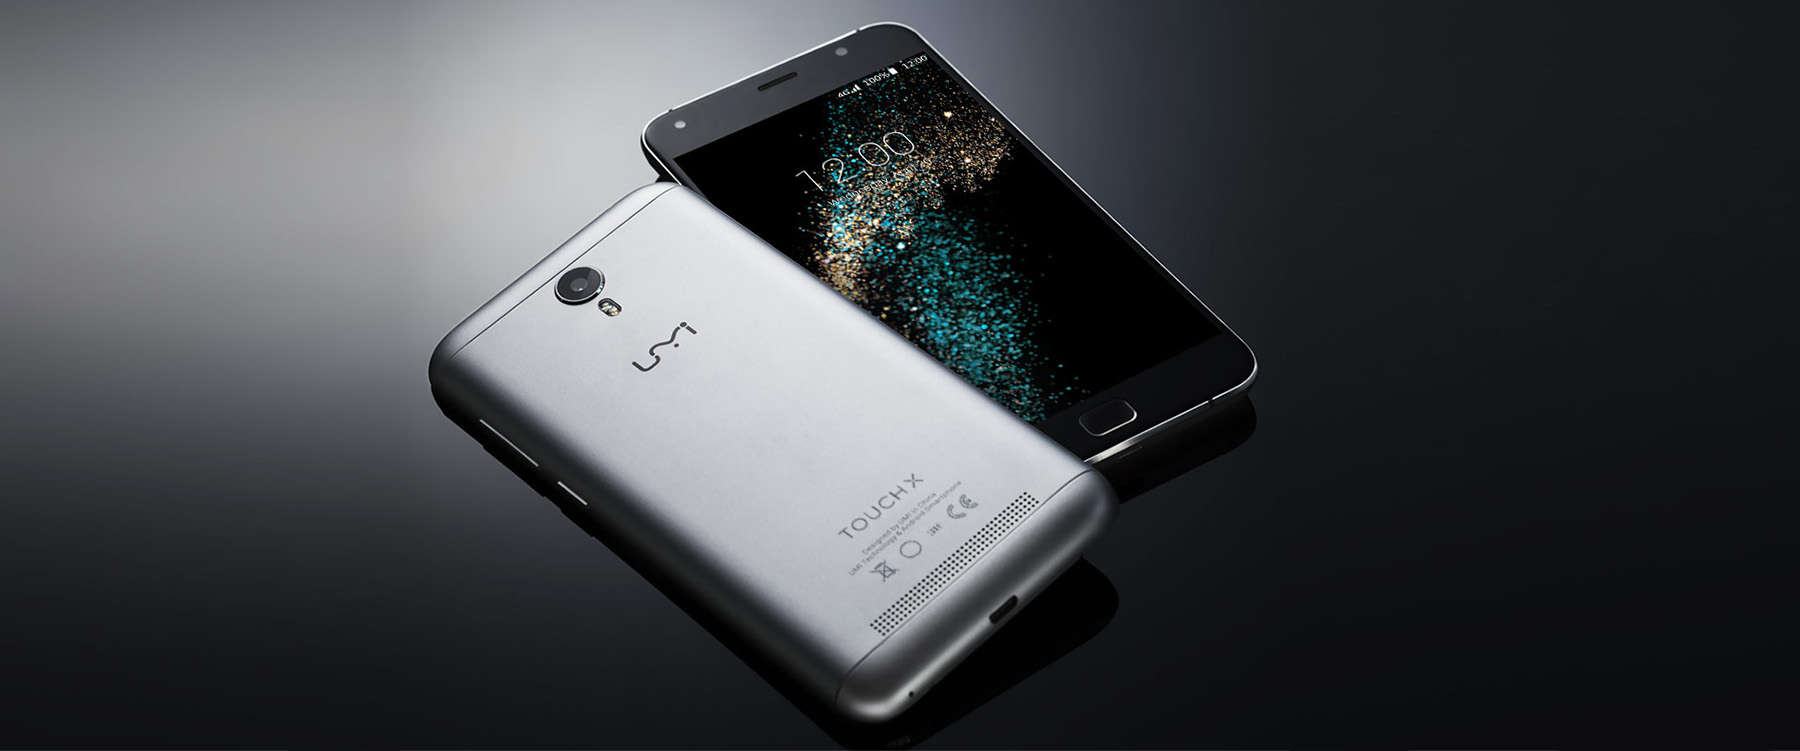 UMI TOUCH X 4G Phablet